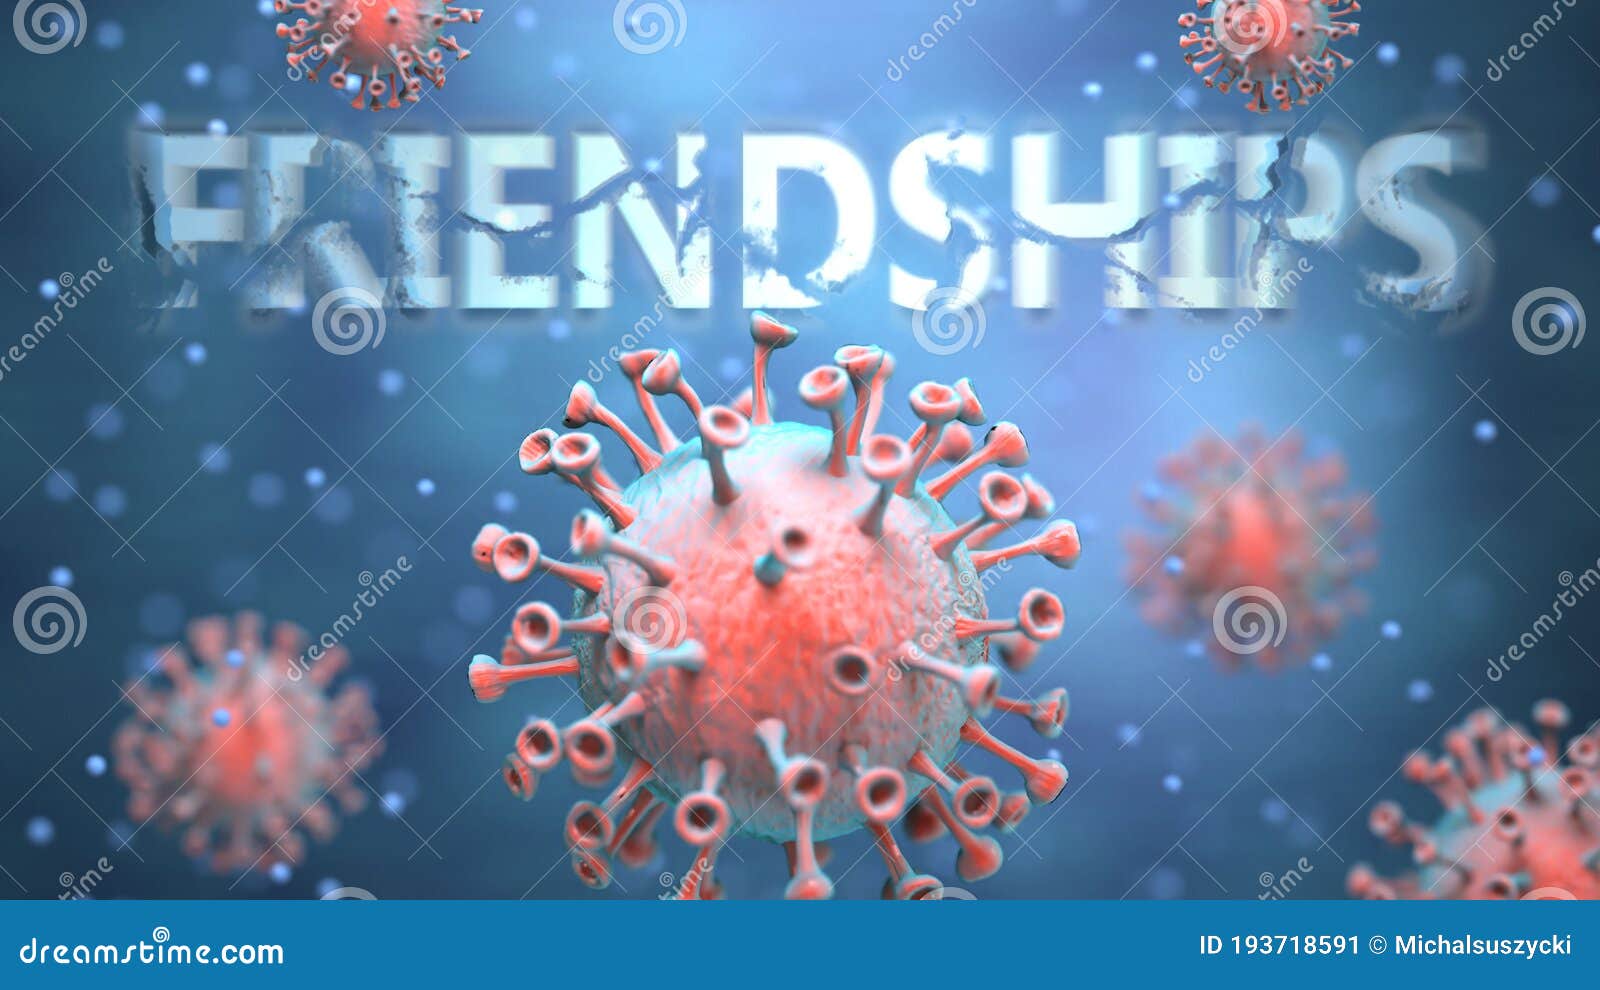 covid and friendships, pictured as red viruses attacking word friendships to ize turmoil, global world problems and the